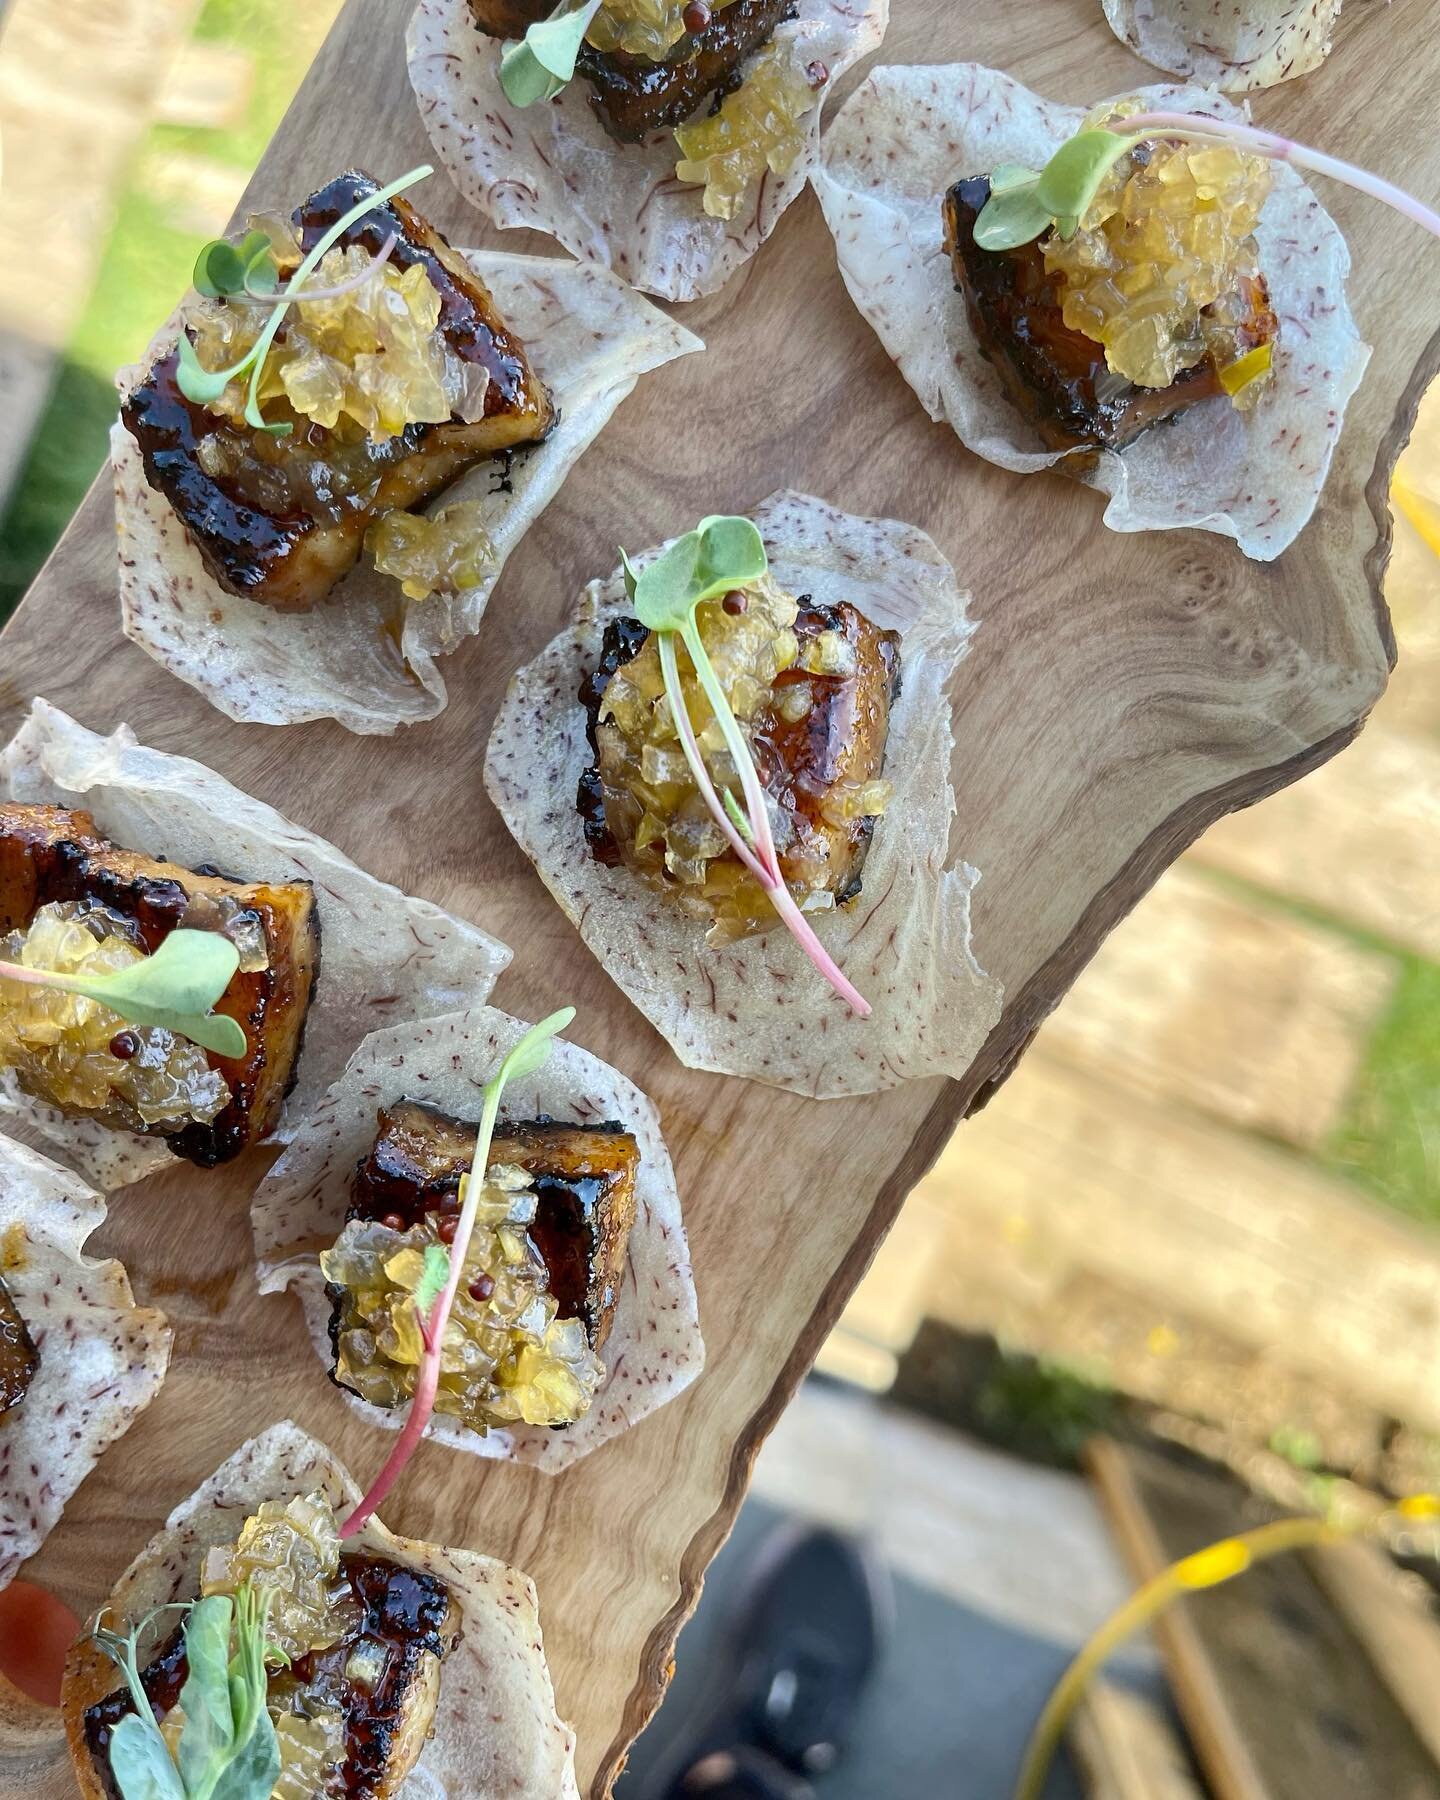 The perfect bite - crispy taro chip, melt in your mouth pork belly, sweet and tangy apple relish - from last night&rsquo;s wedding ✨

It&rsquo;s been the busiest summer EVER!! I have sooo many photos from all the weddings we&rsquo;ve been catering th